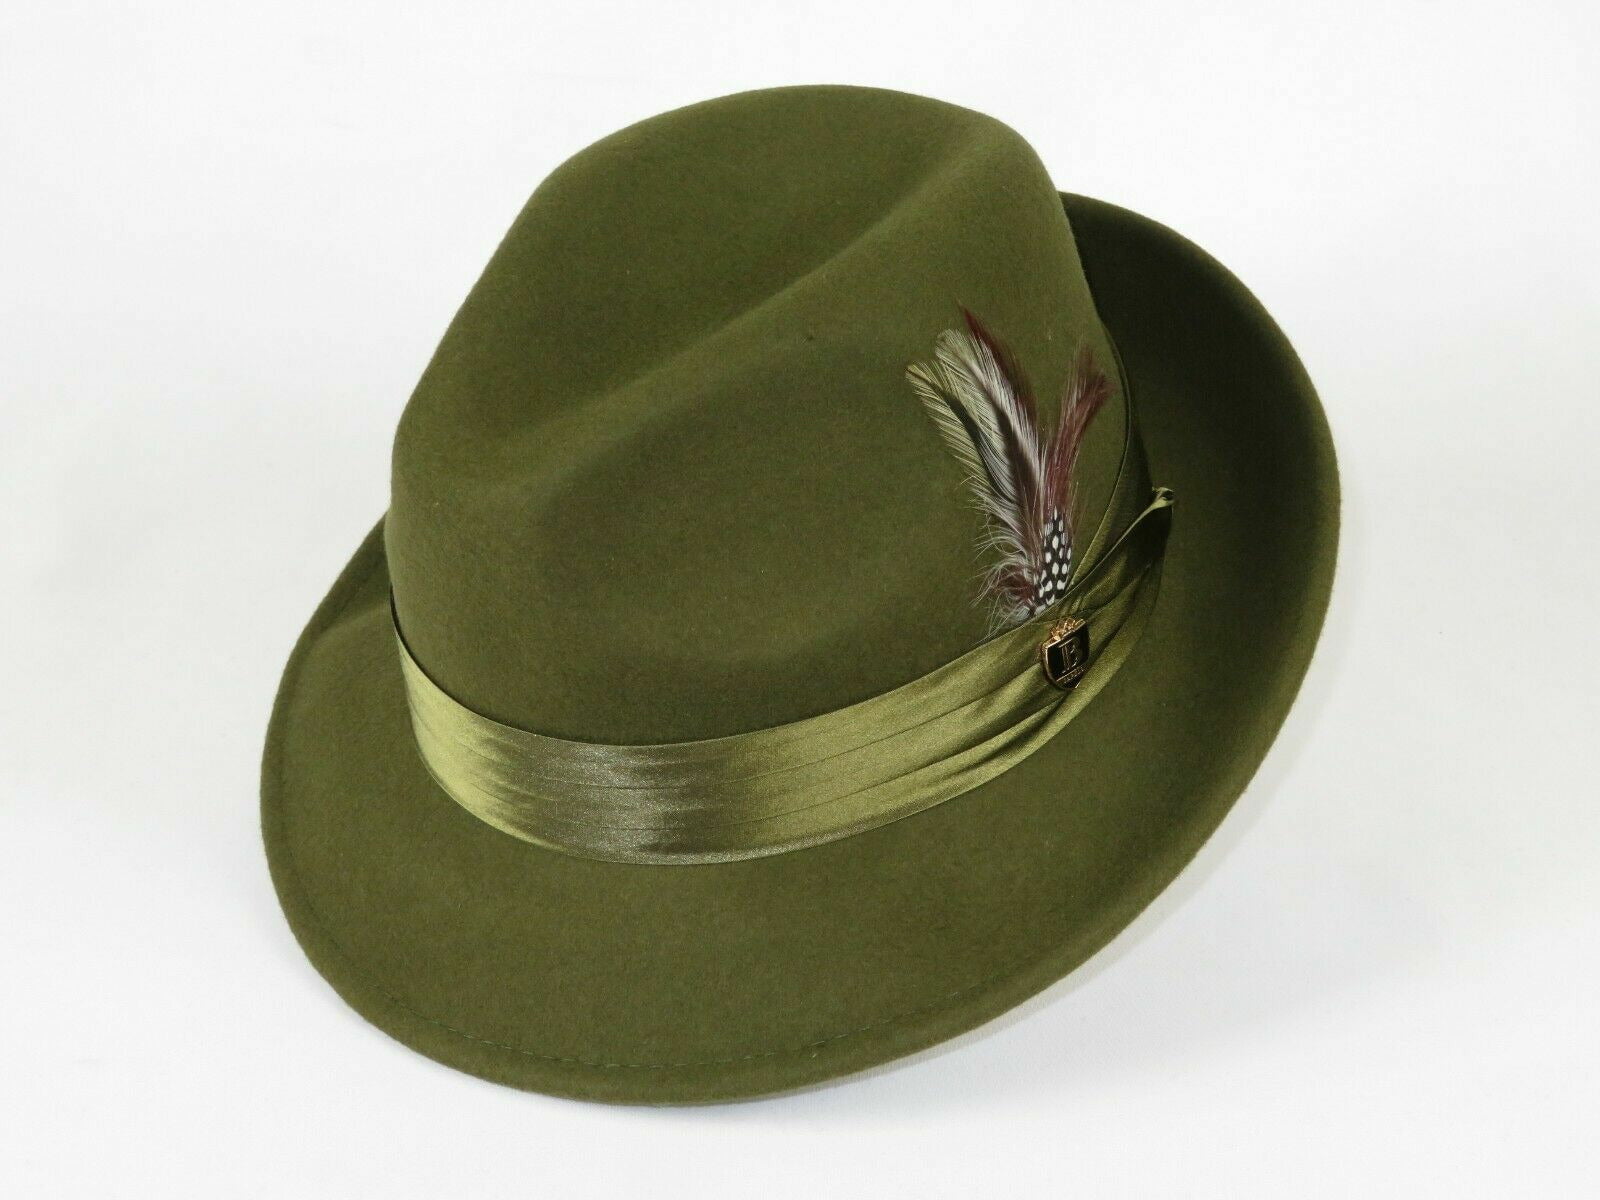 Gents Wedding Derby Event 100% Wool Hand Made Satin Lined Olive Top Felt Hat 